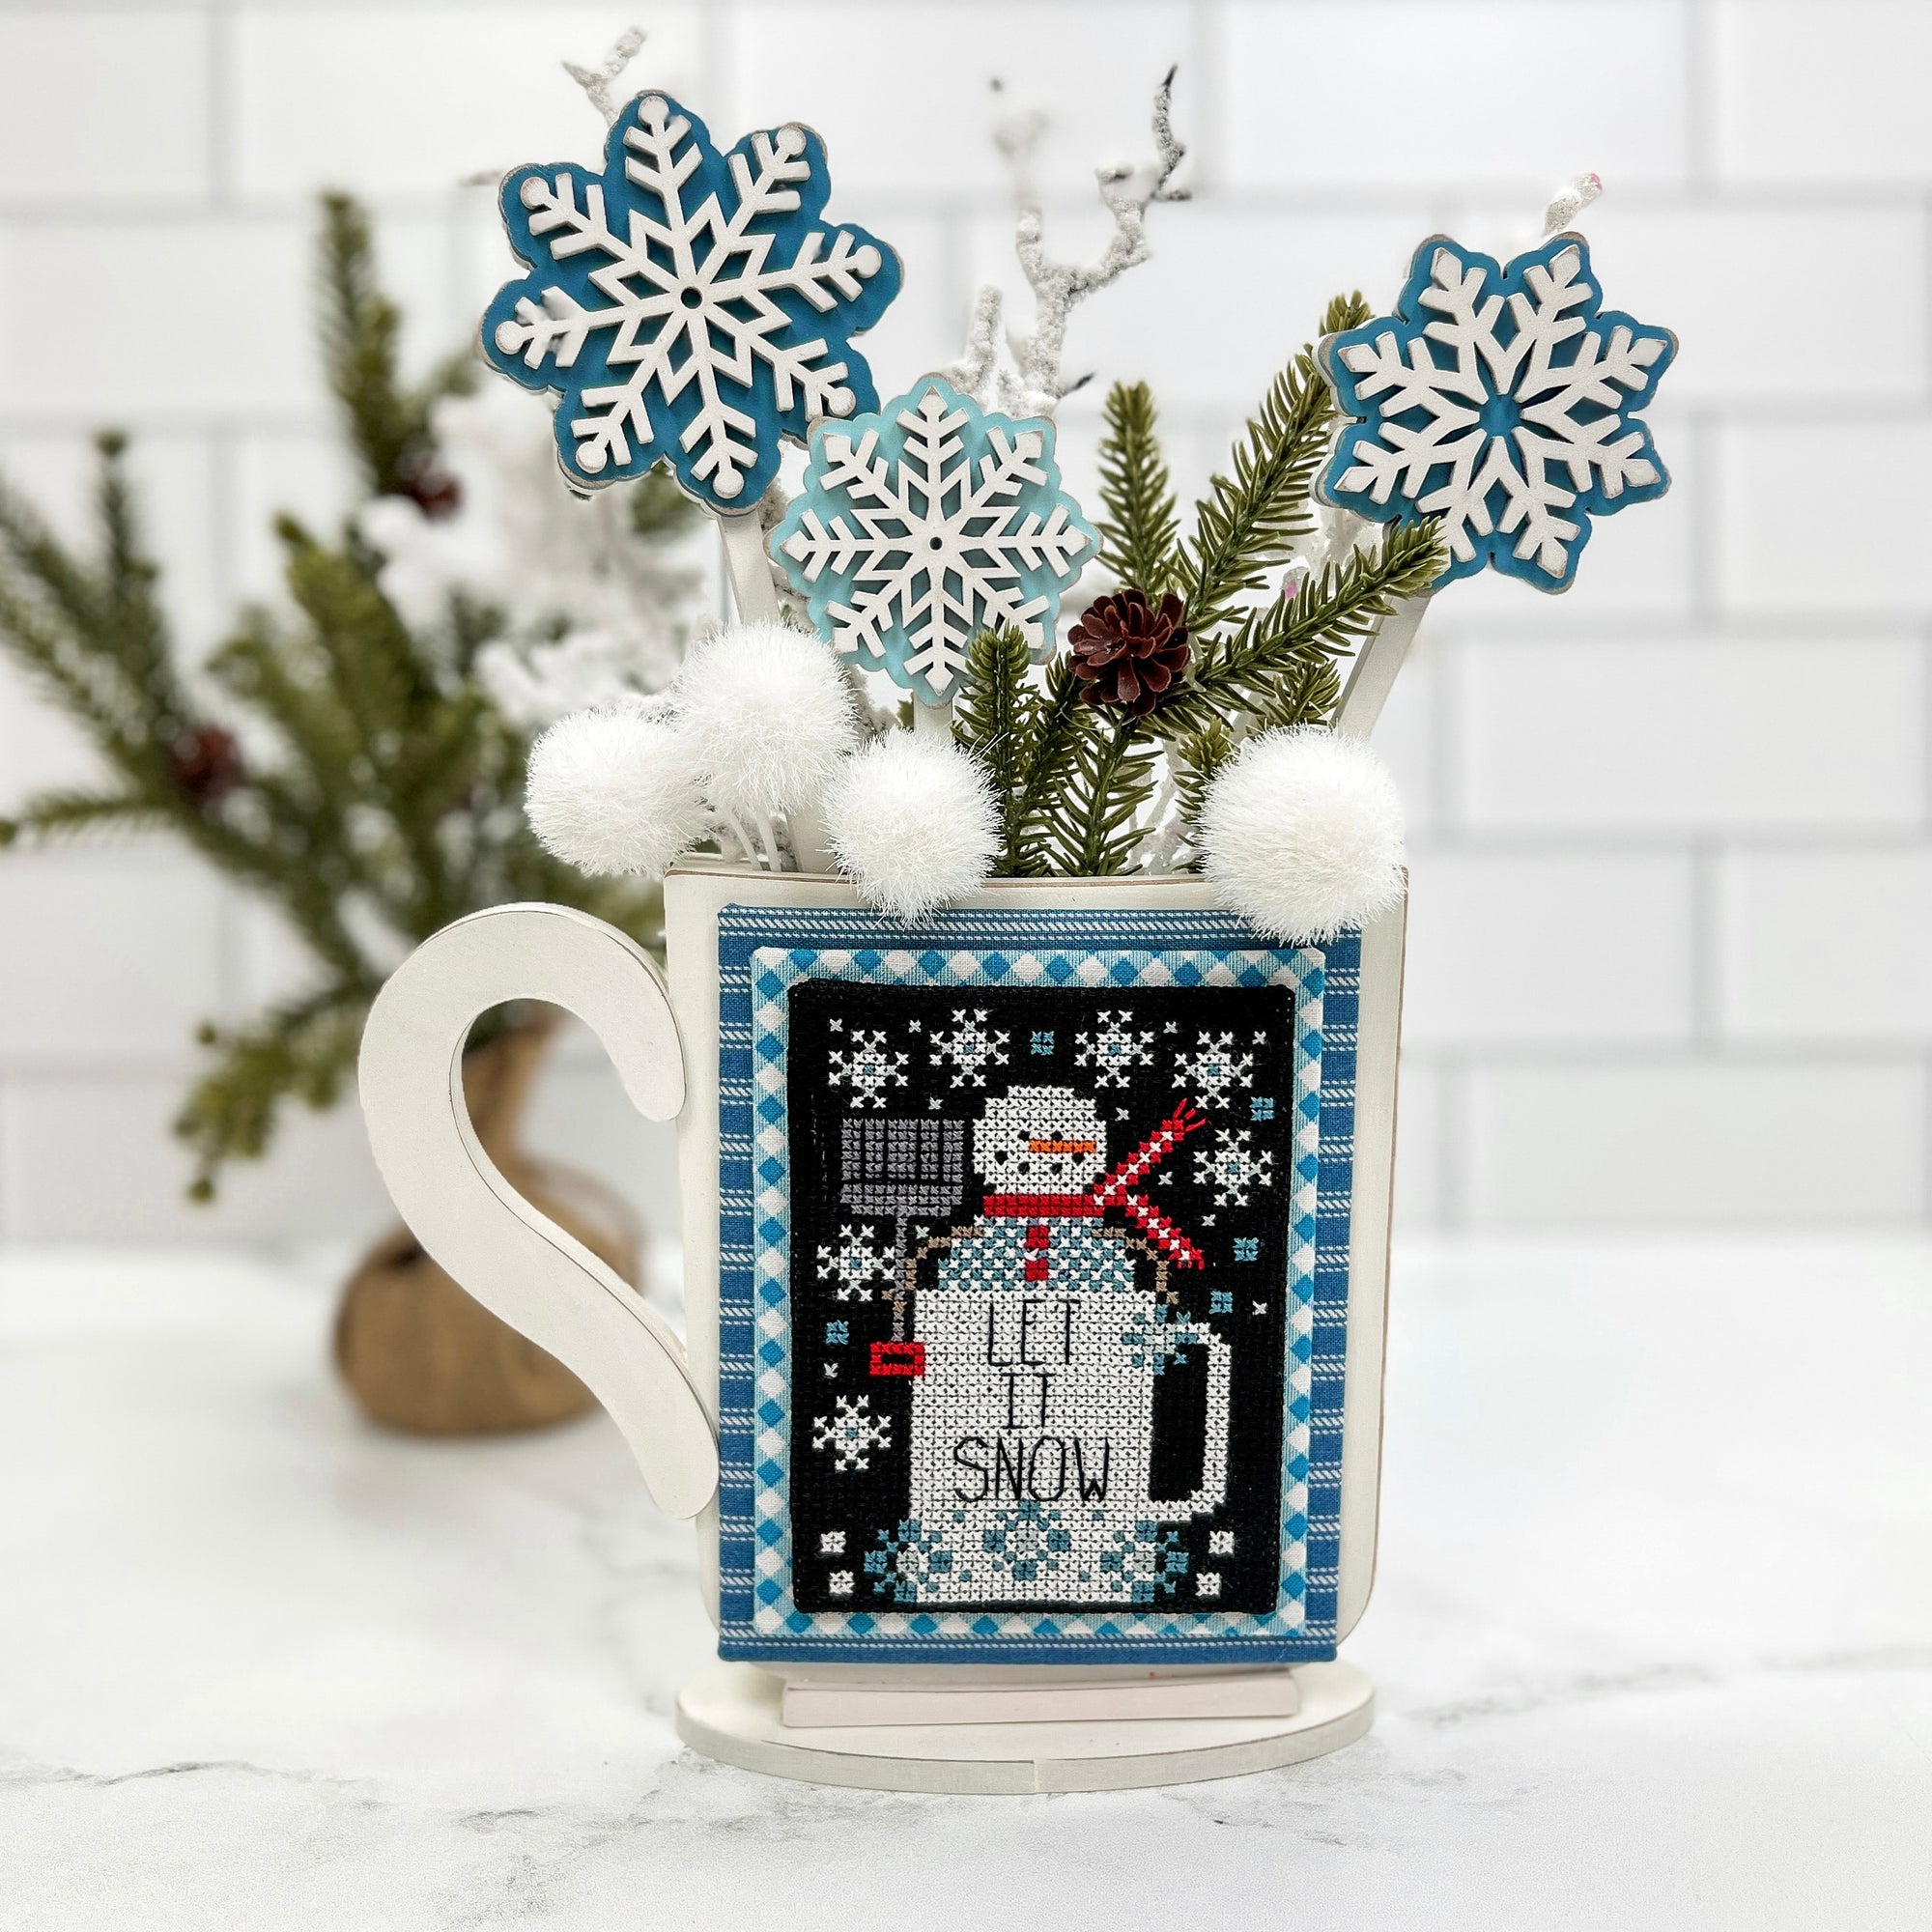 winter mug with snowflakes sticking out for displaying winter cross stitch finishes. Wood mug with snowflakes cross stitch display